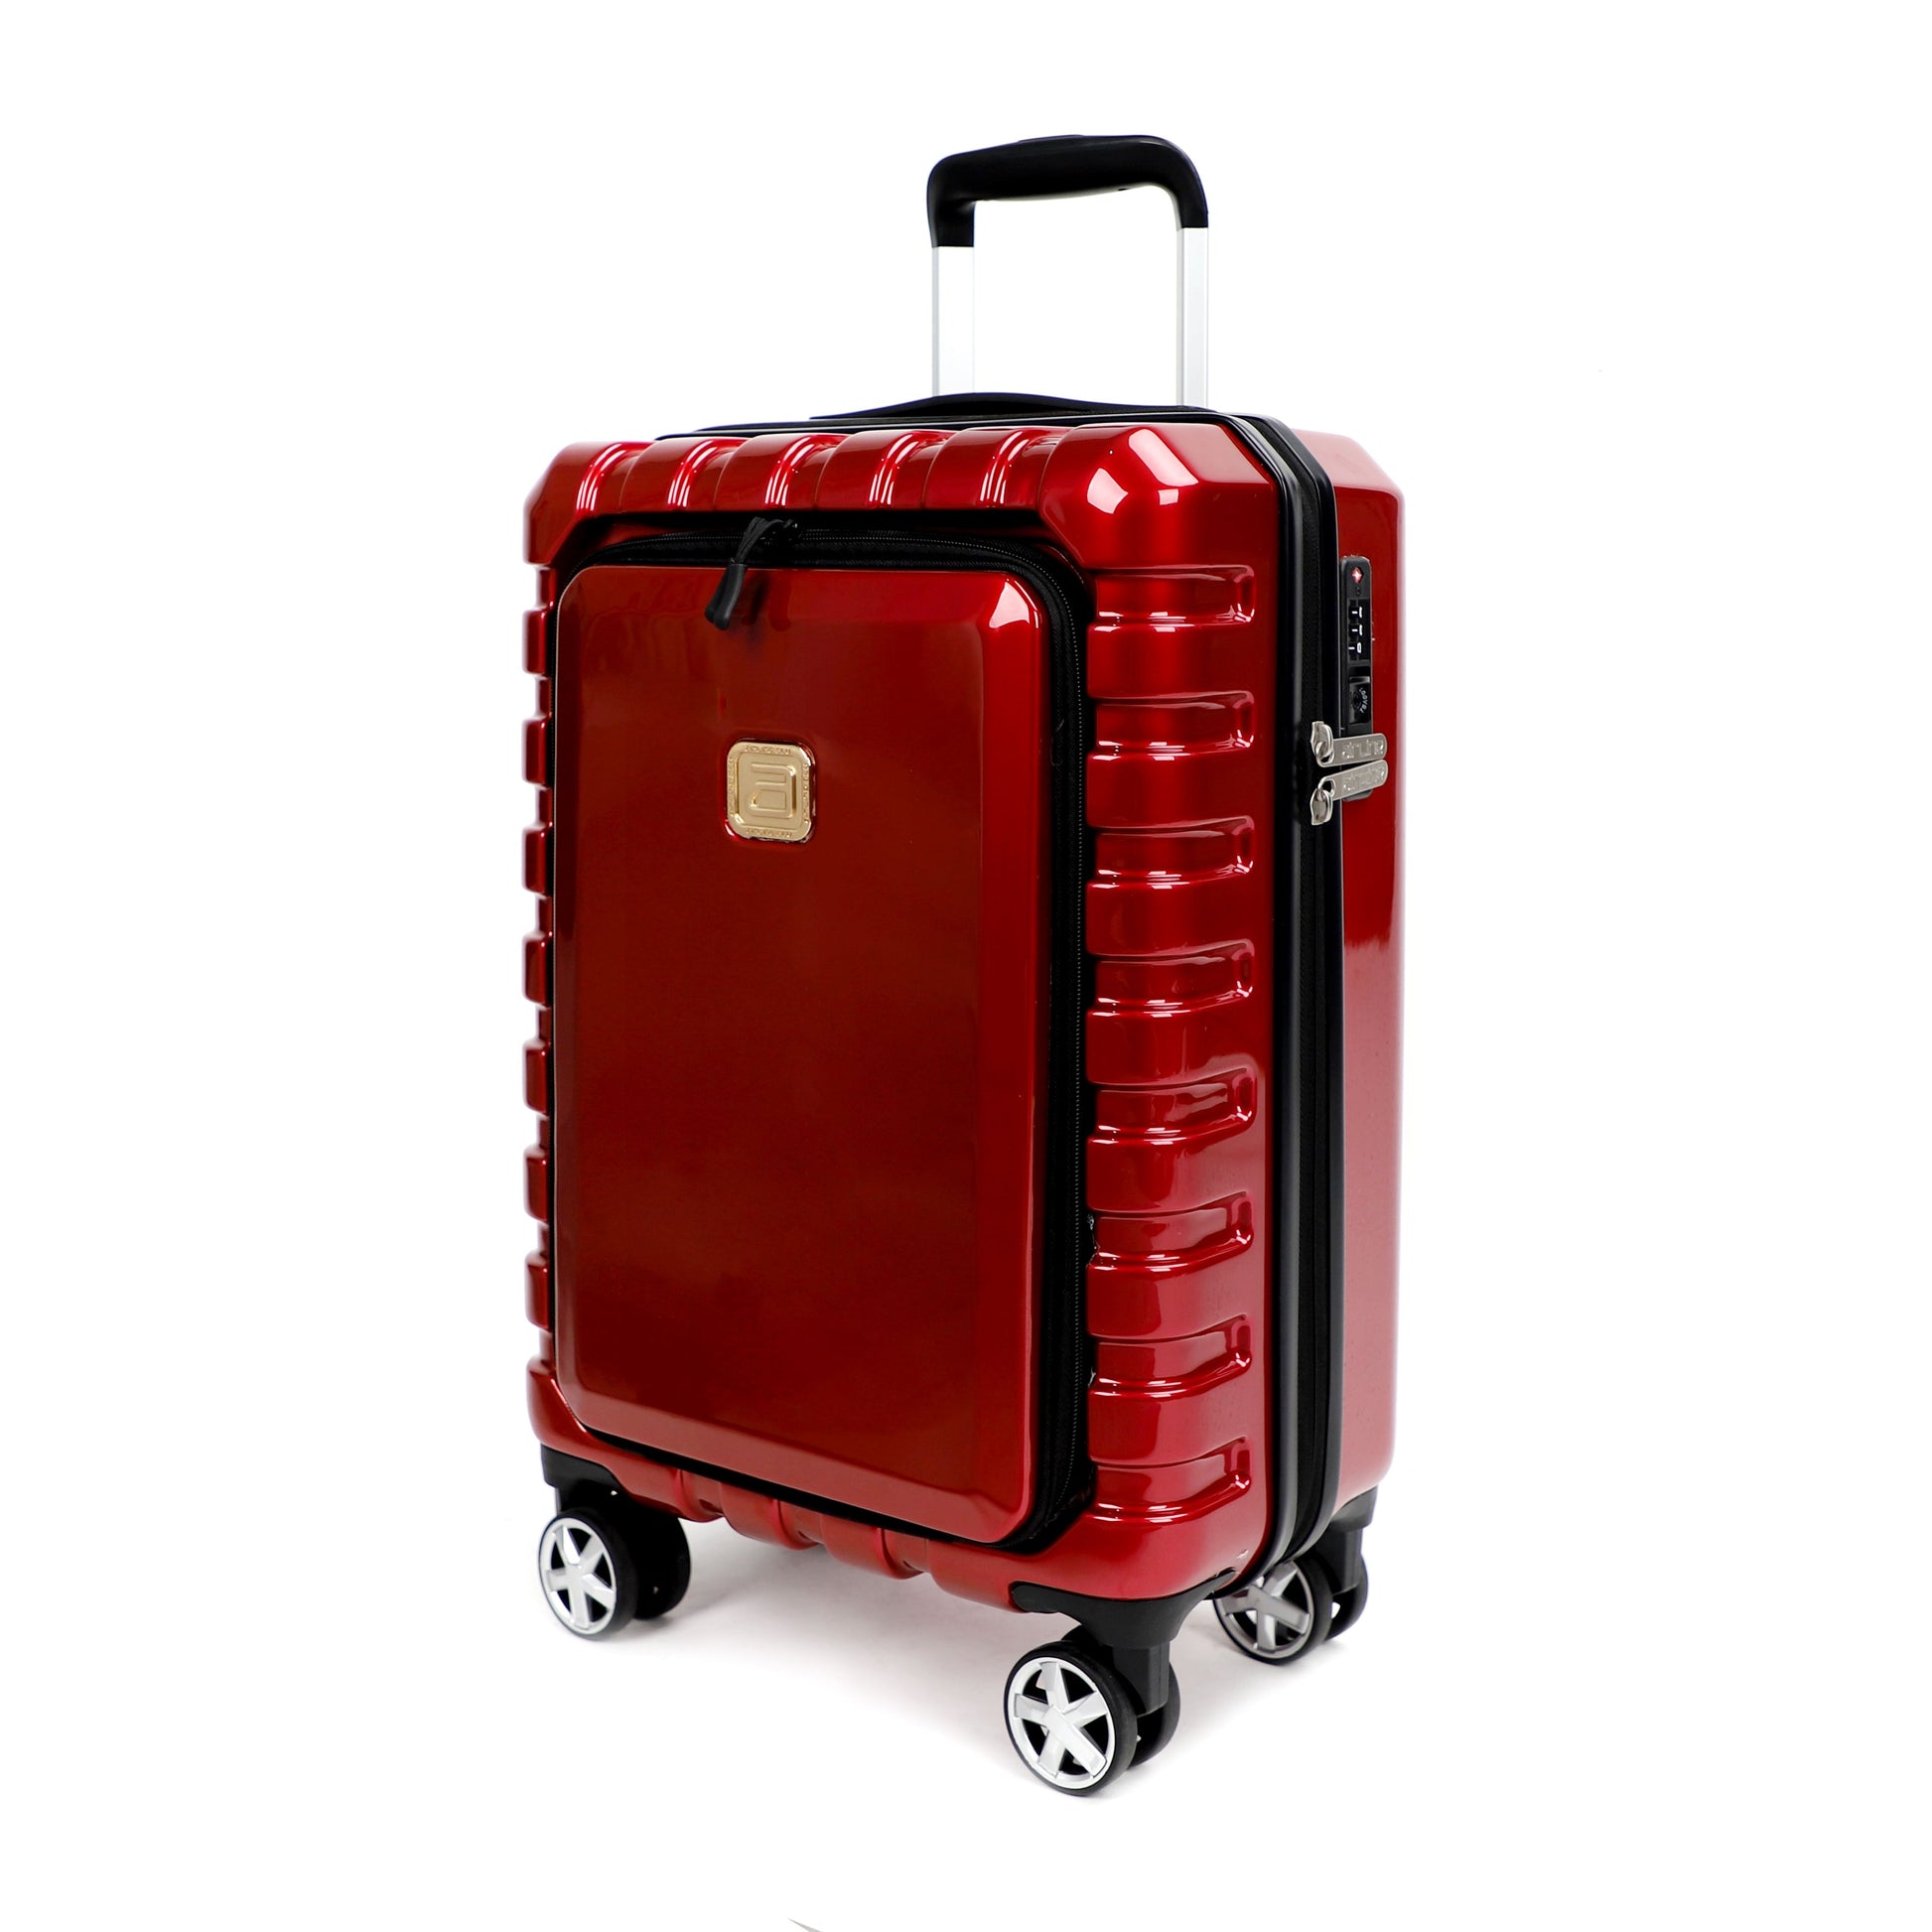 Airline_Carry_On_Luggage_Red_Side_view_T1978155002